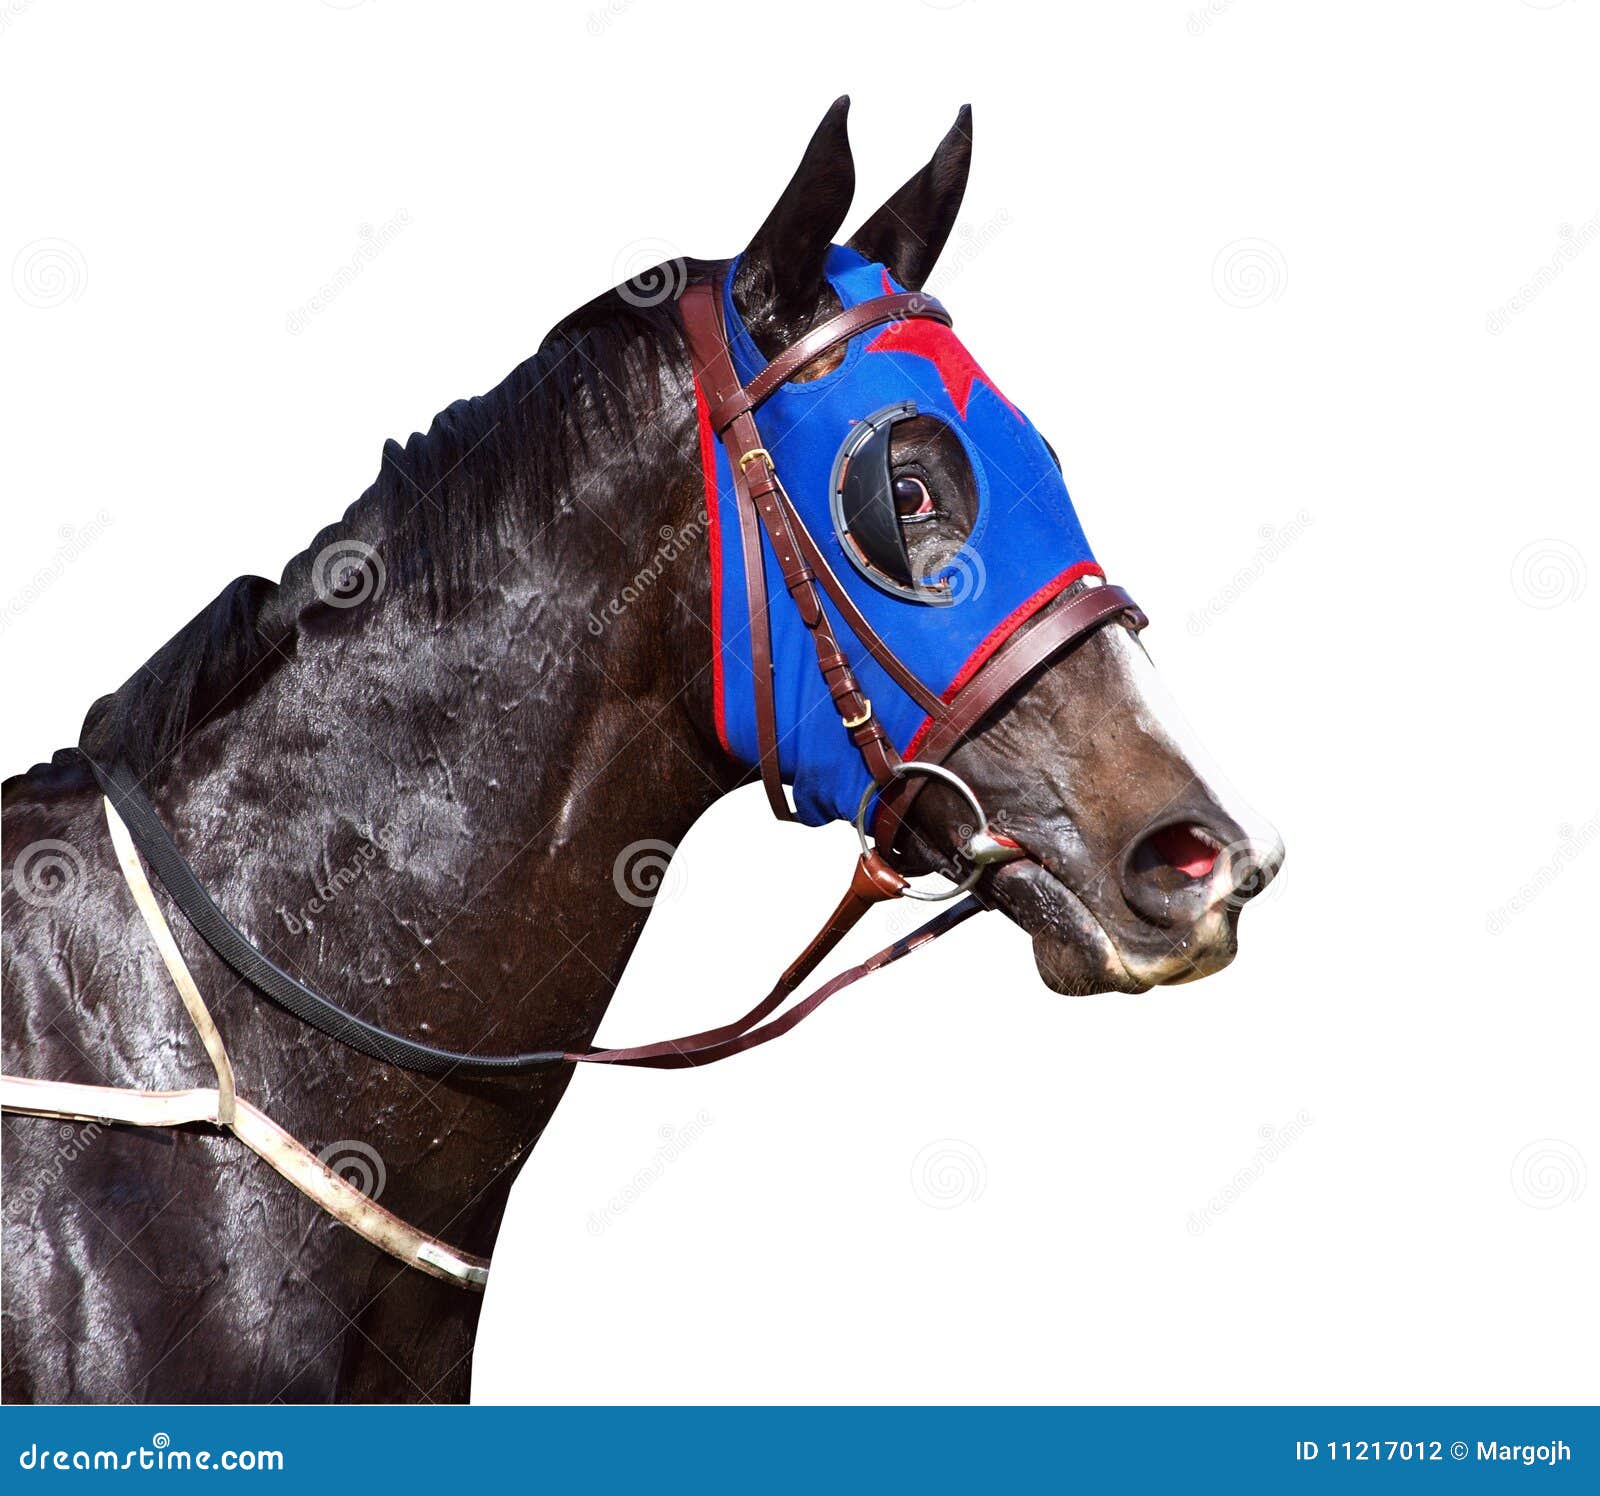 sweaty racehorse with flared nostrils